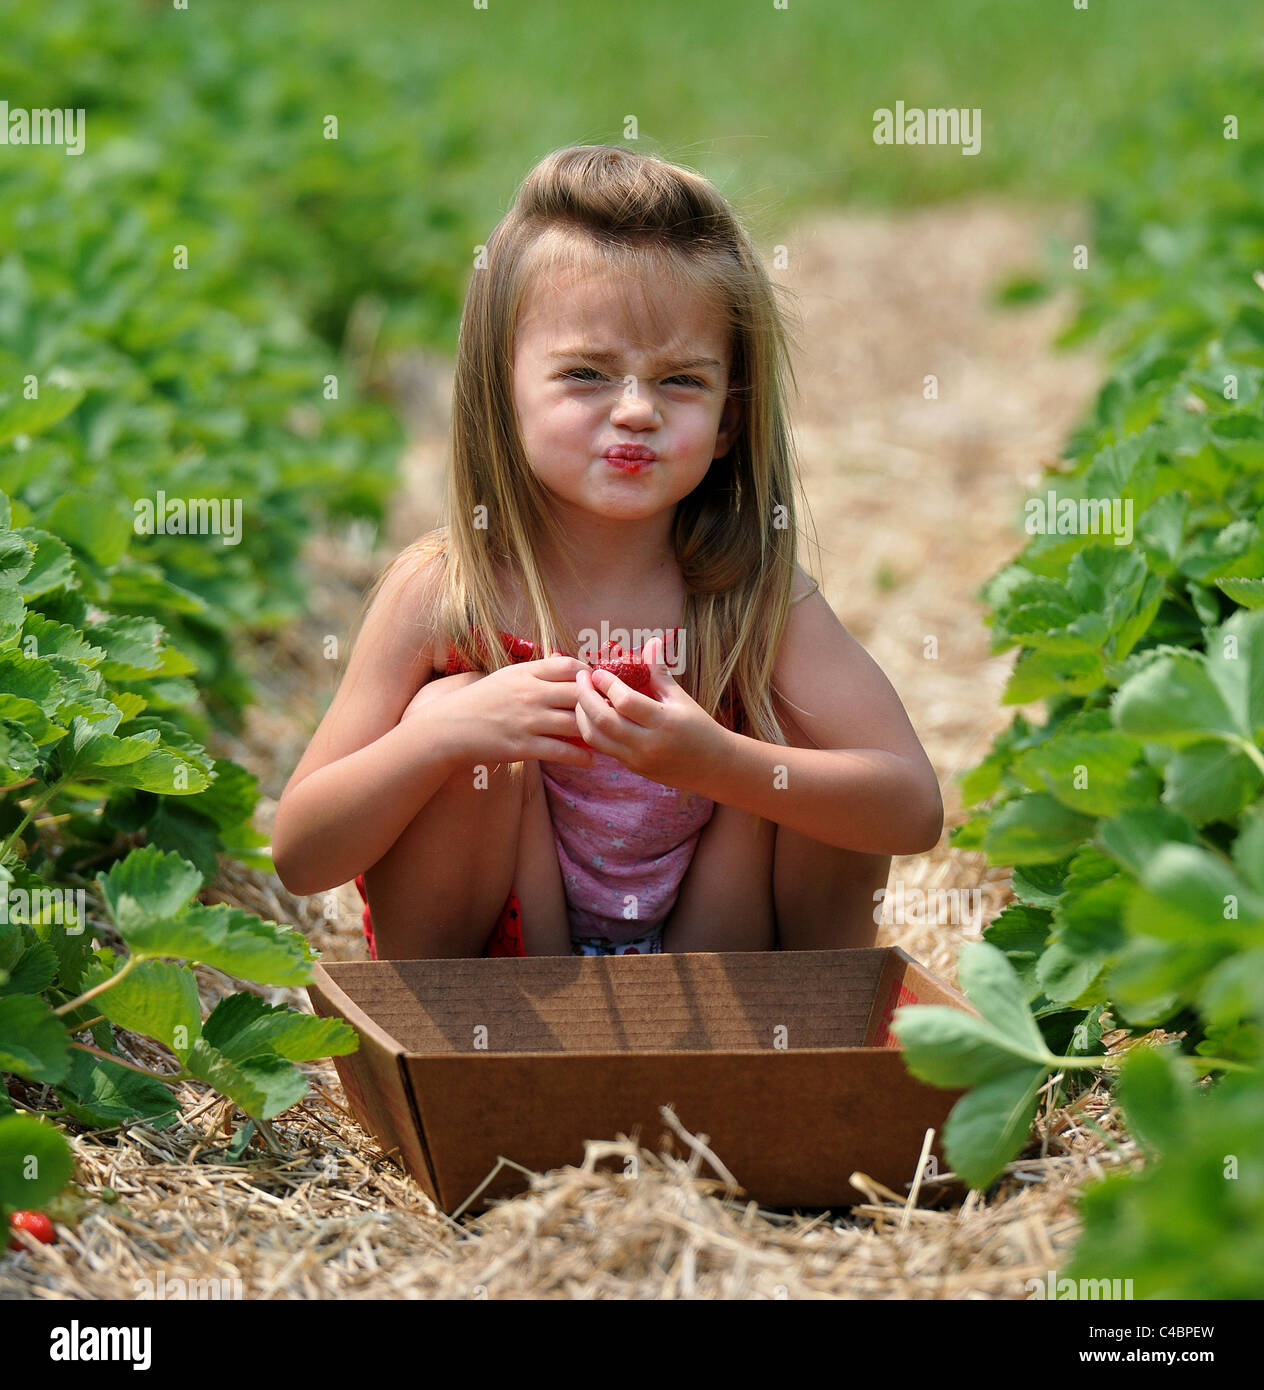 A little girl makes a funny face as she eats a berry during a strawberry picking at a farm in CT USA Stock Photo